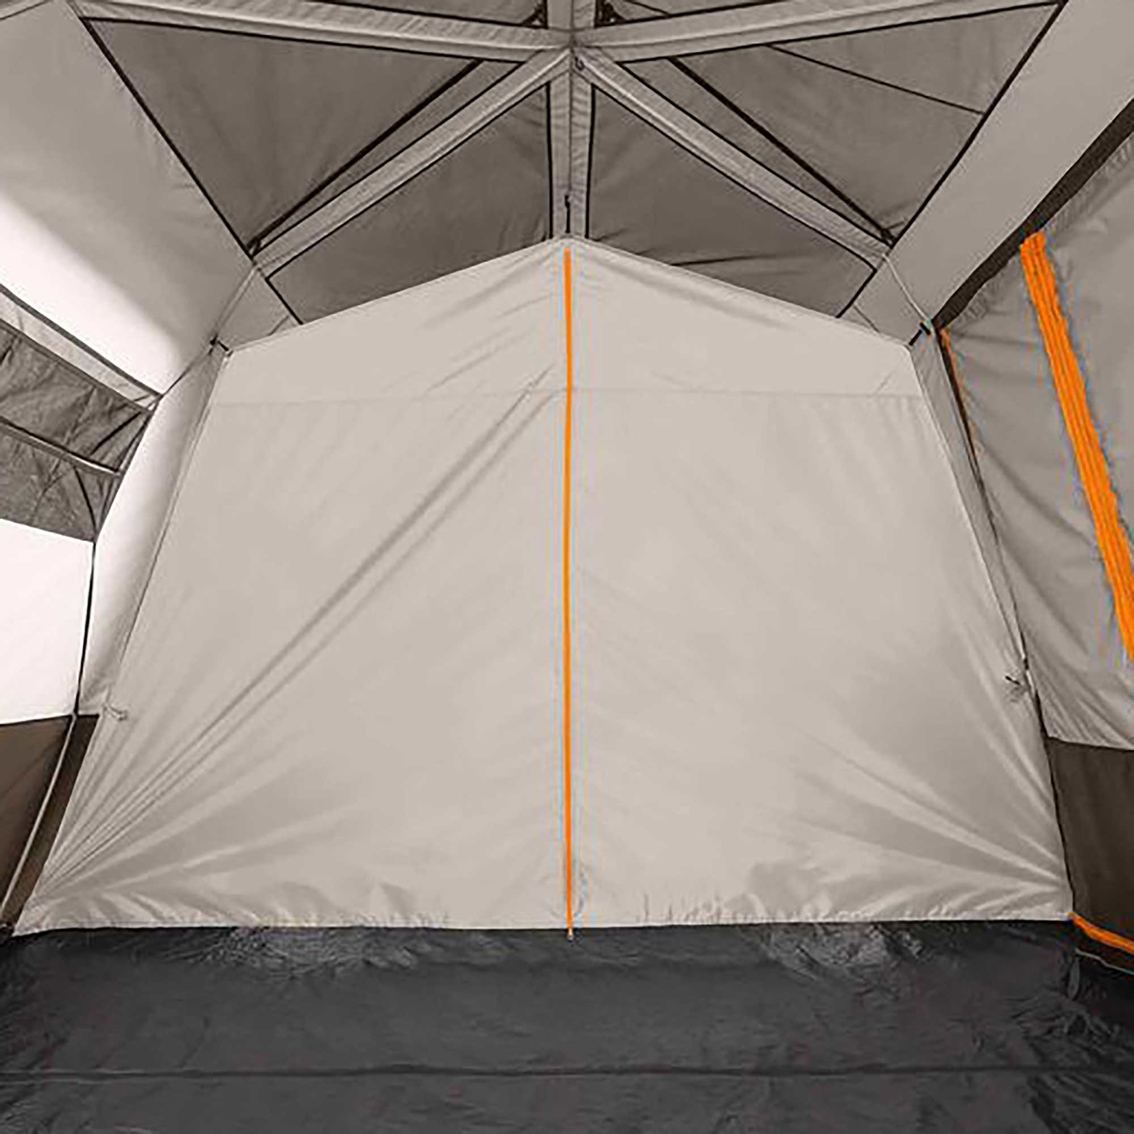 Bushnell 12P Outdoorsman Instant Cabin Tent - Image 6 of 10